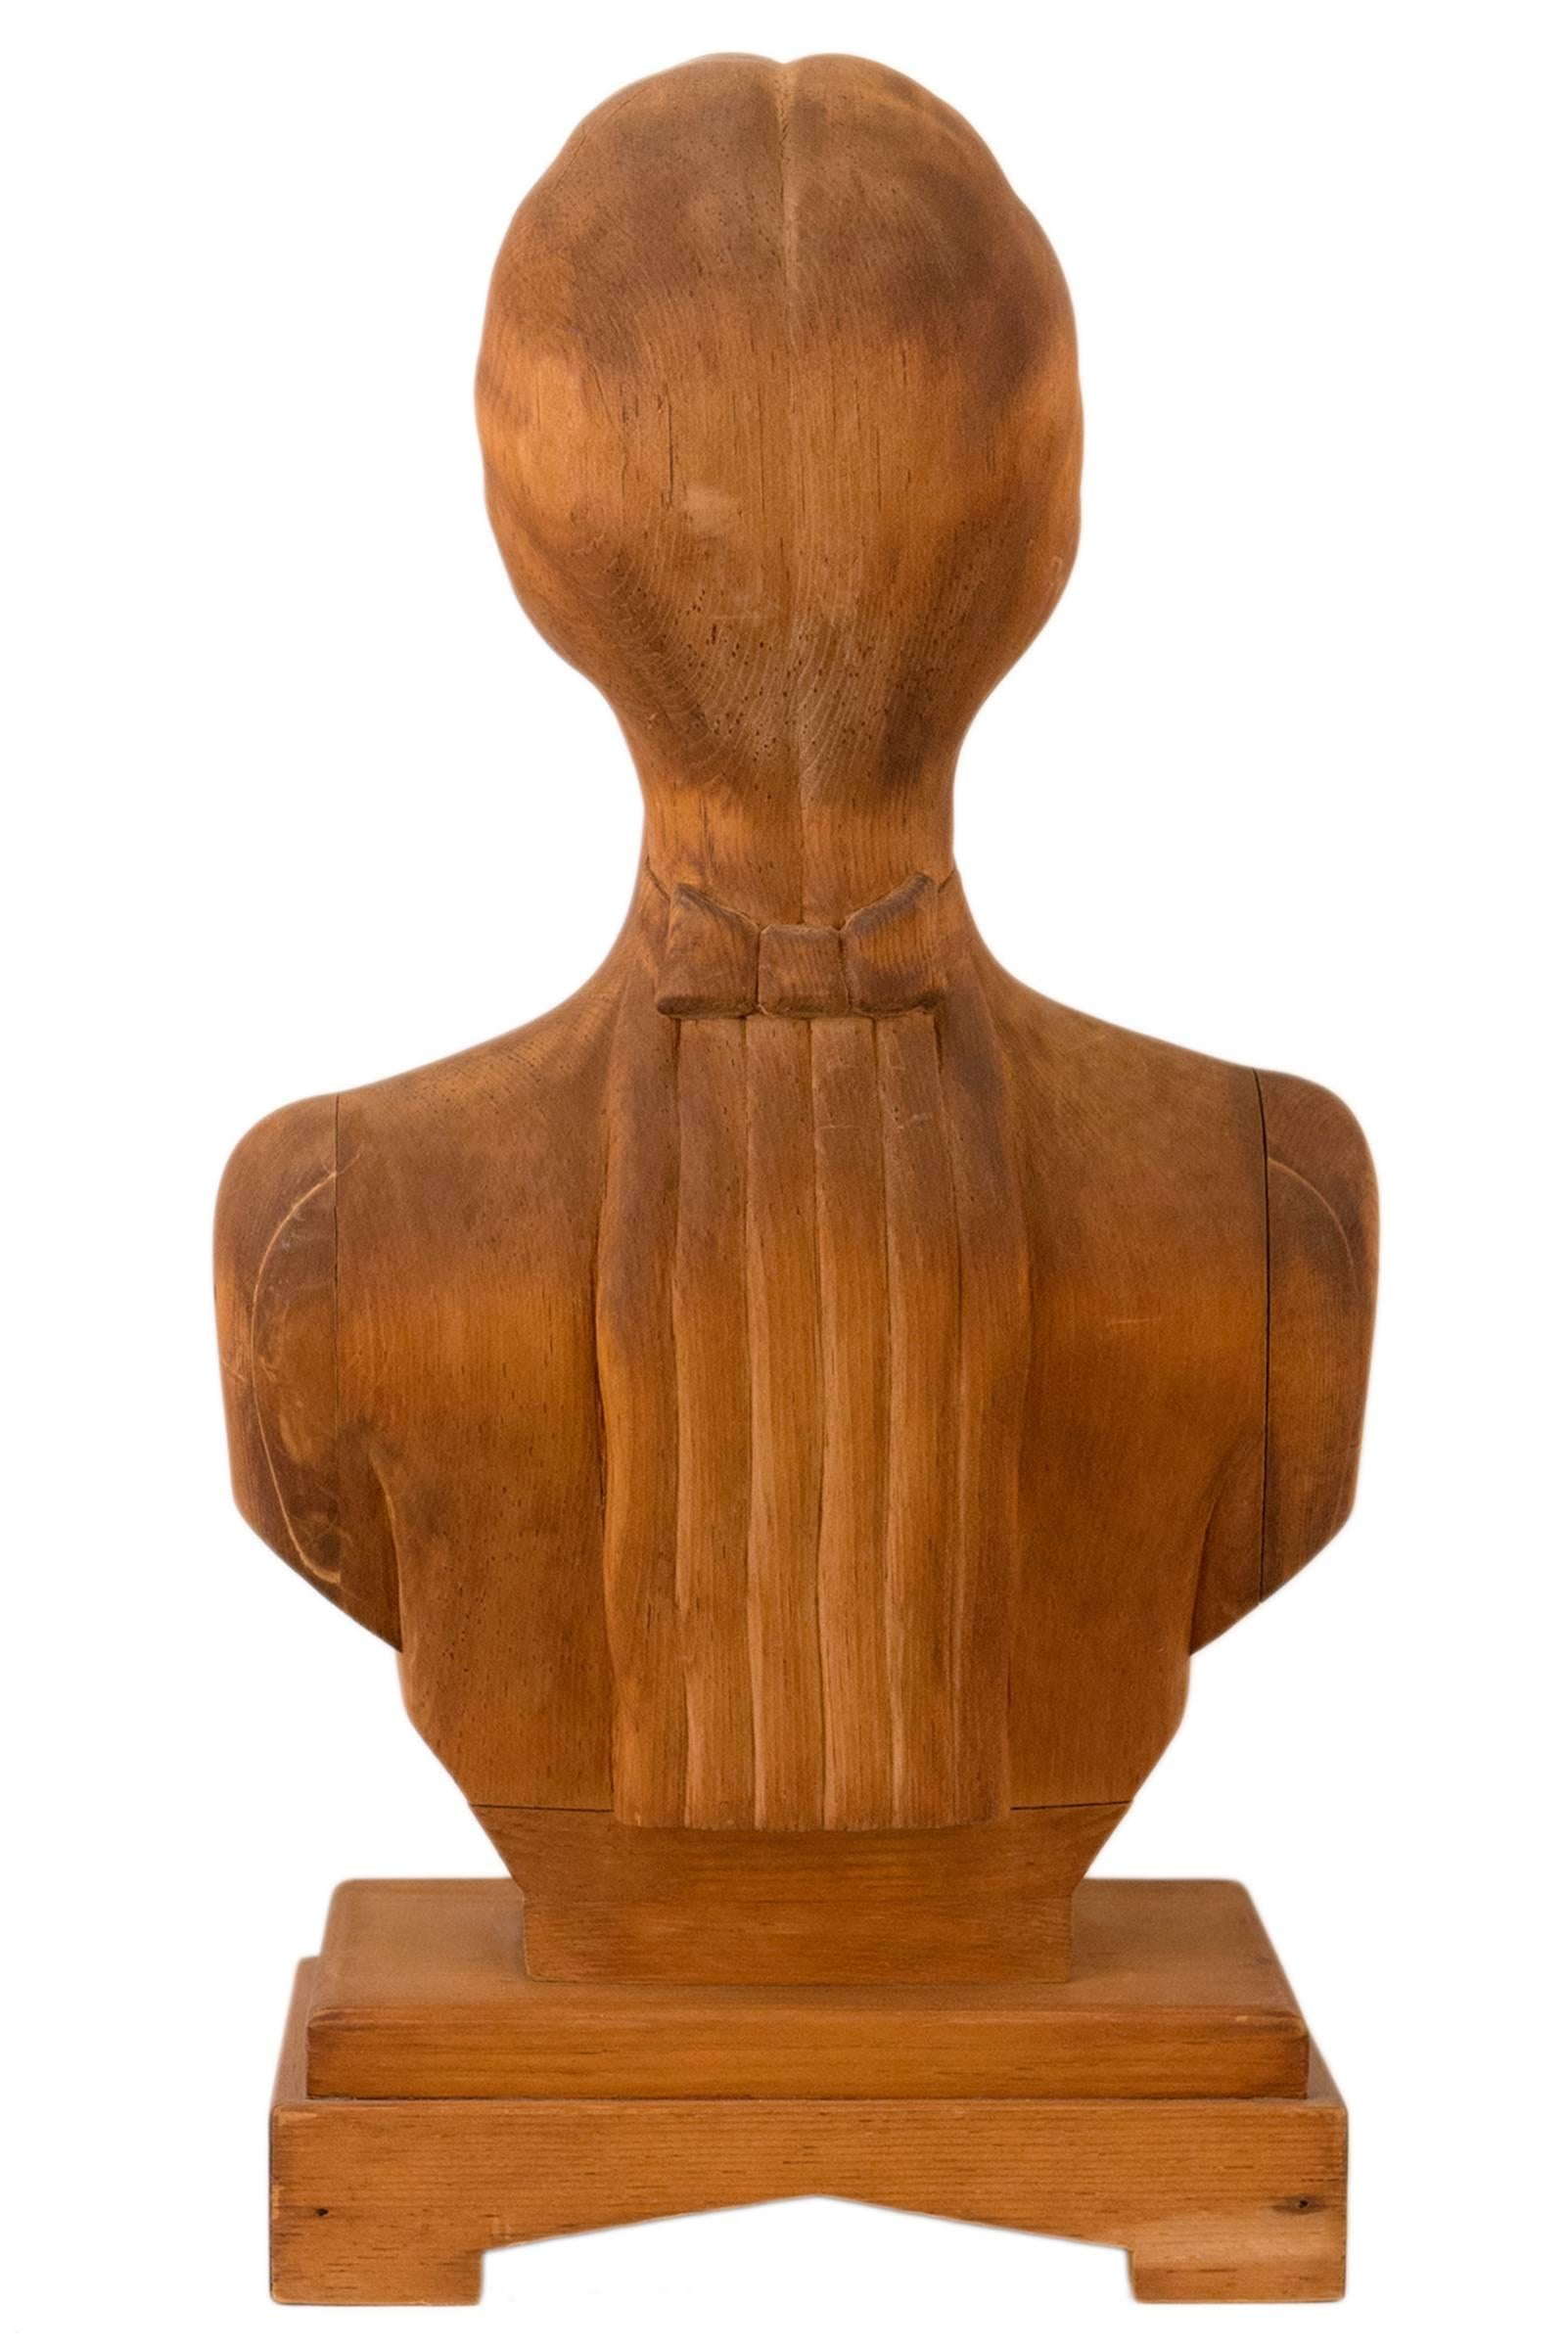 Unusual carved wooden portrait bust. A beautifully refined and reductive carving. Never painted having a natural nut brown patina.